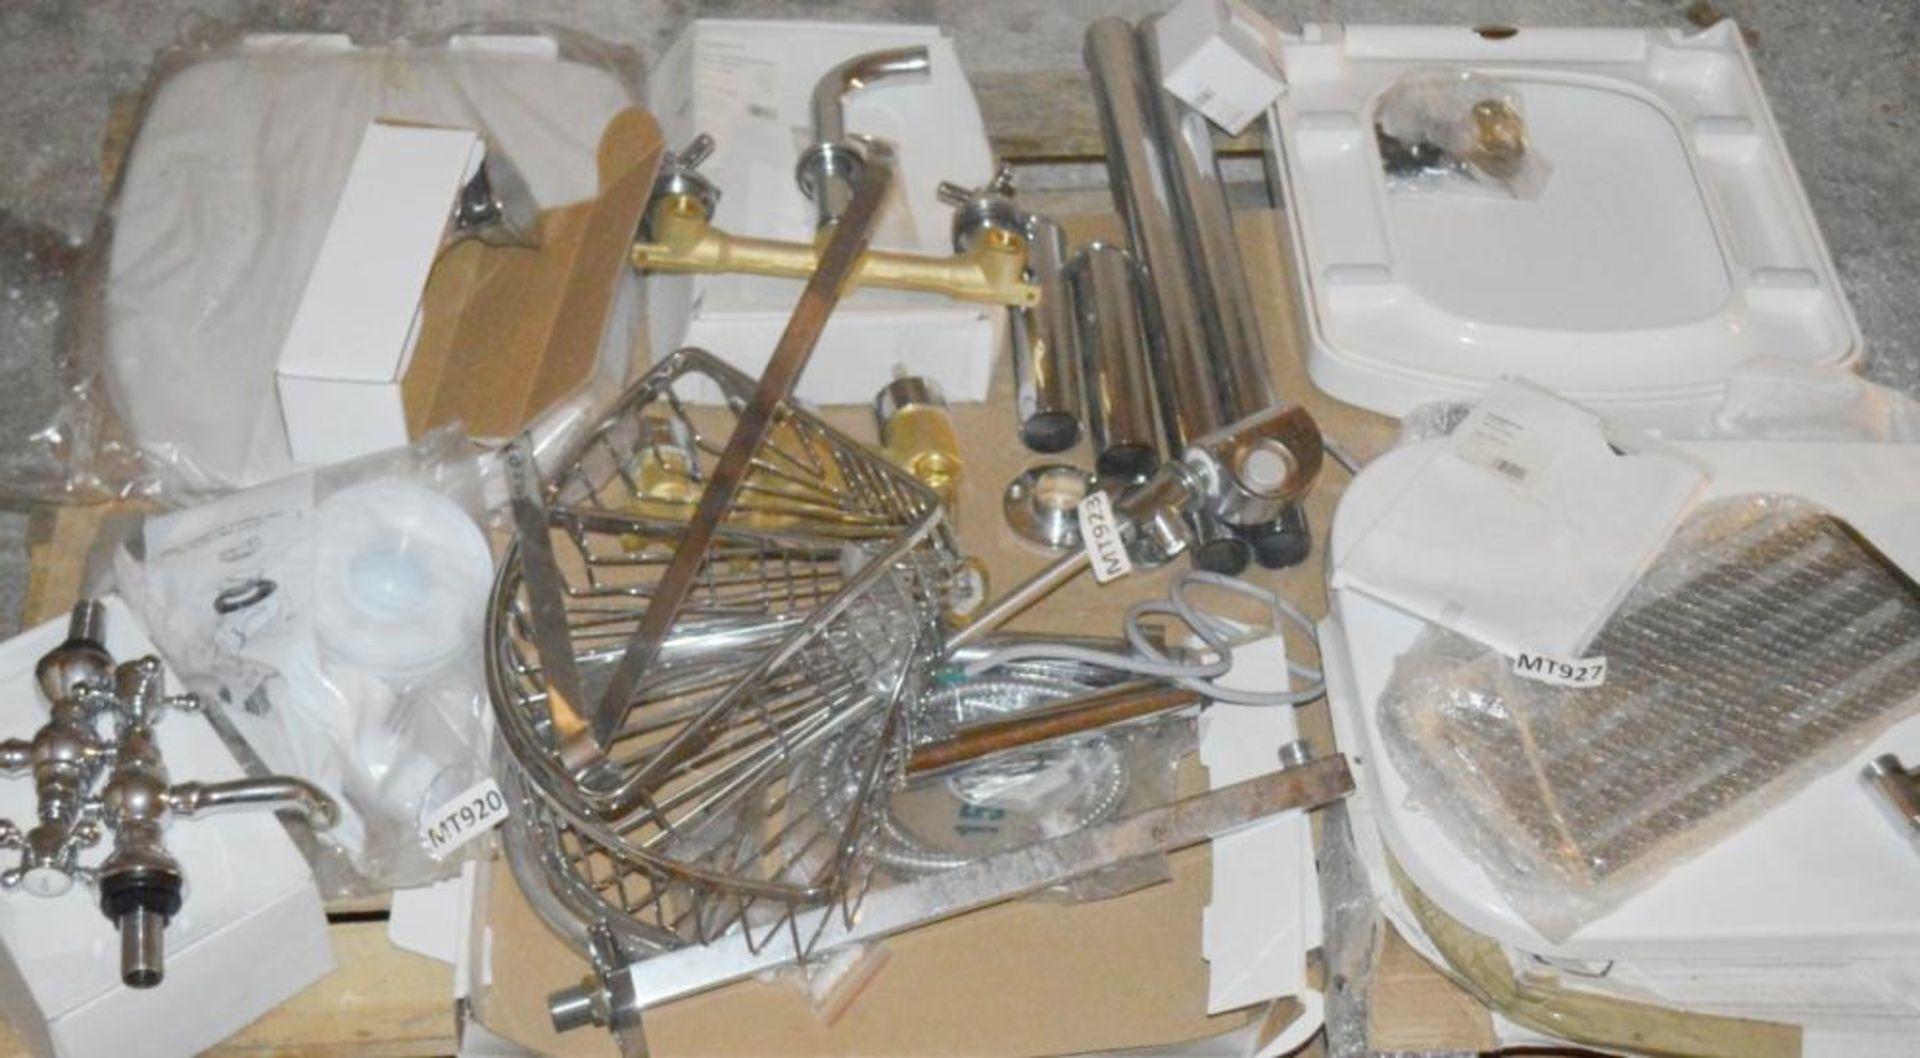 Approx 15 x Assorted Items Of Bathroom Brassware And Accessories - Brand New Boxed Stock - CL269 - L